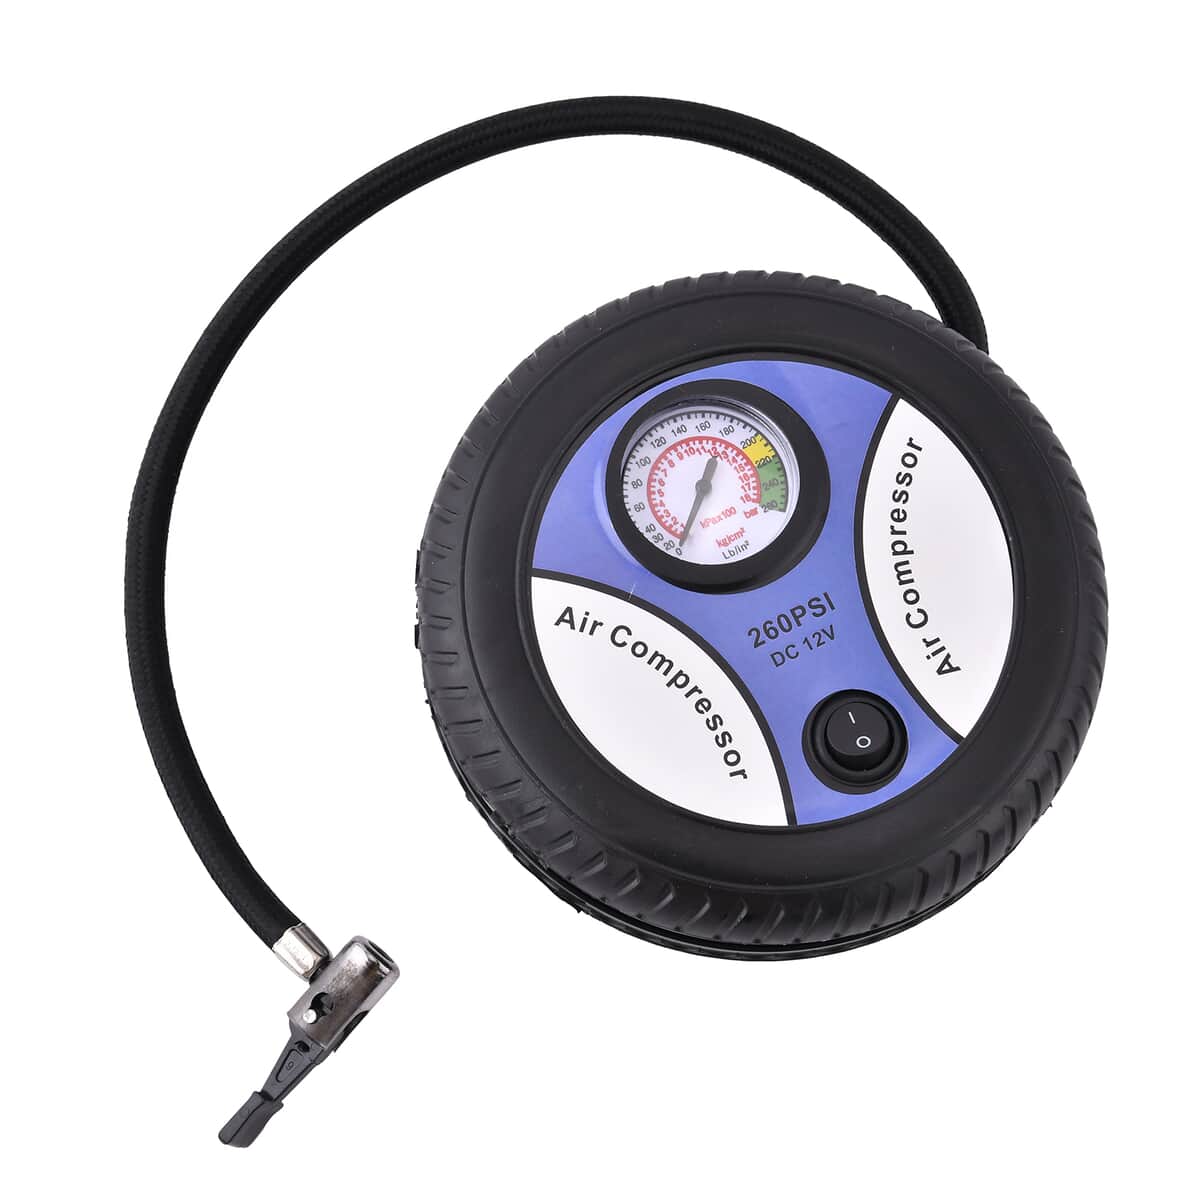 Light Blue Compact Portable Electric Mini DC 12V Air Compressor Tire Inflator with 150 PSI Pressure Gauge Car Tire Pump image number 4